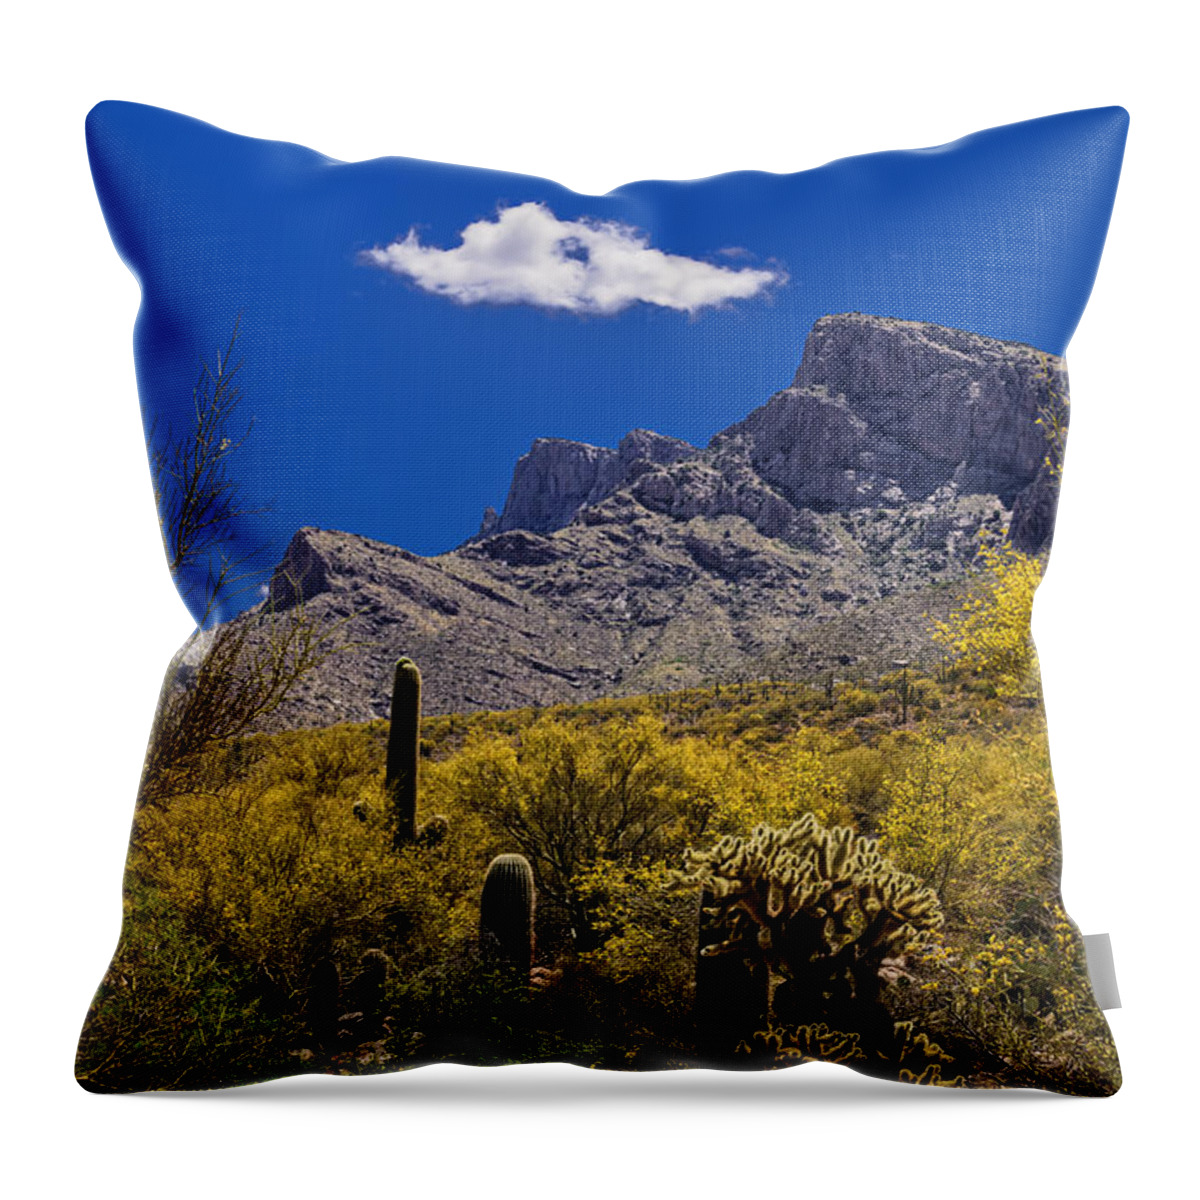 Design Throw Pillow featuring the photograph Valley View No.2 by Mark Myhaver